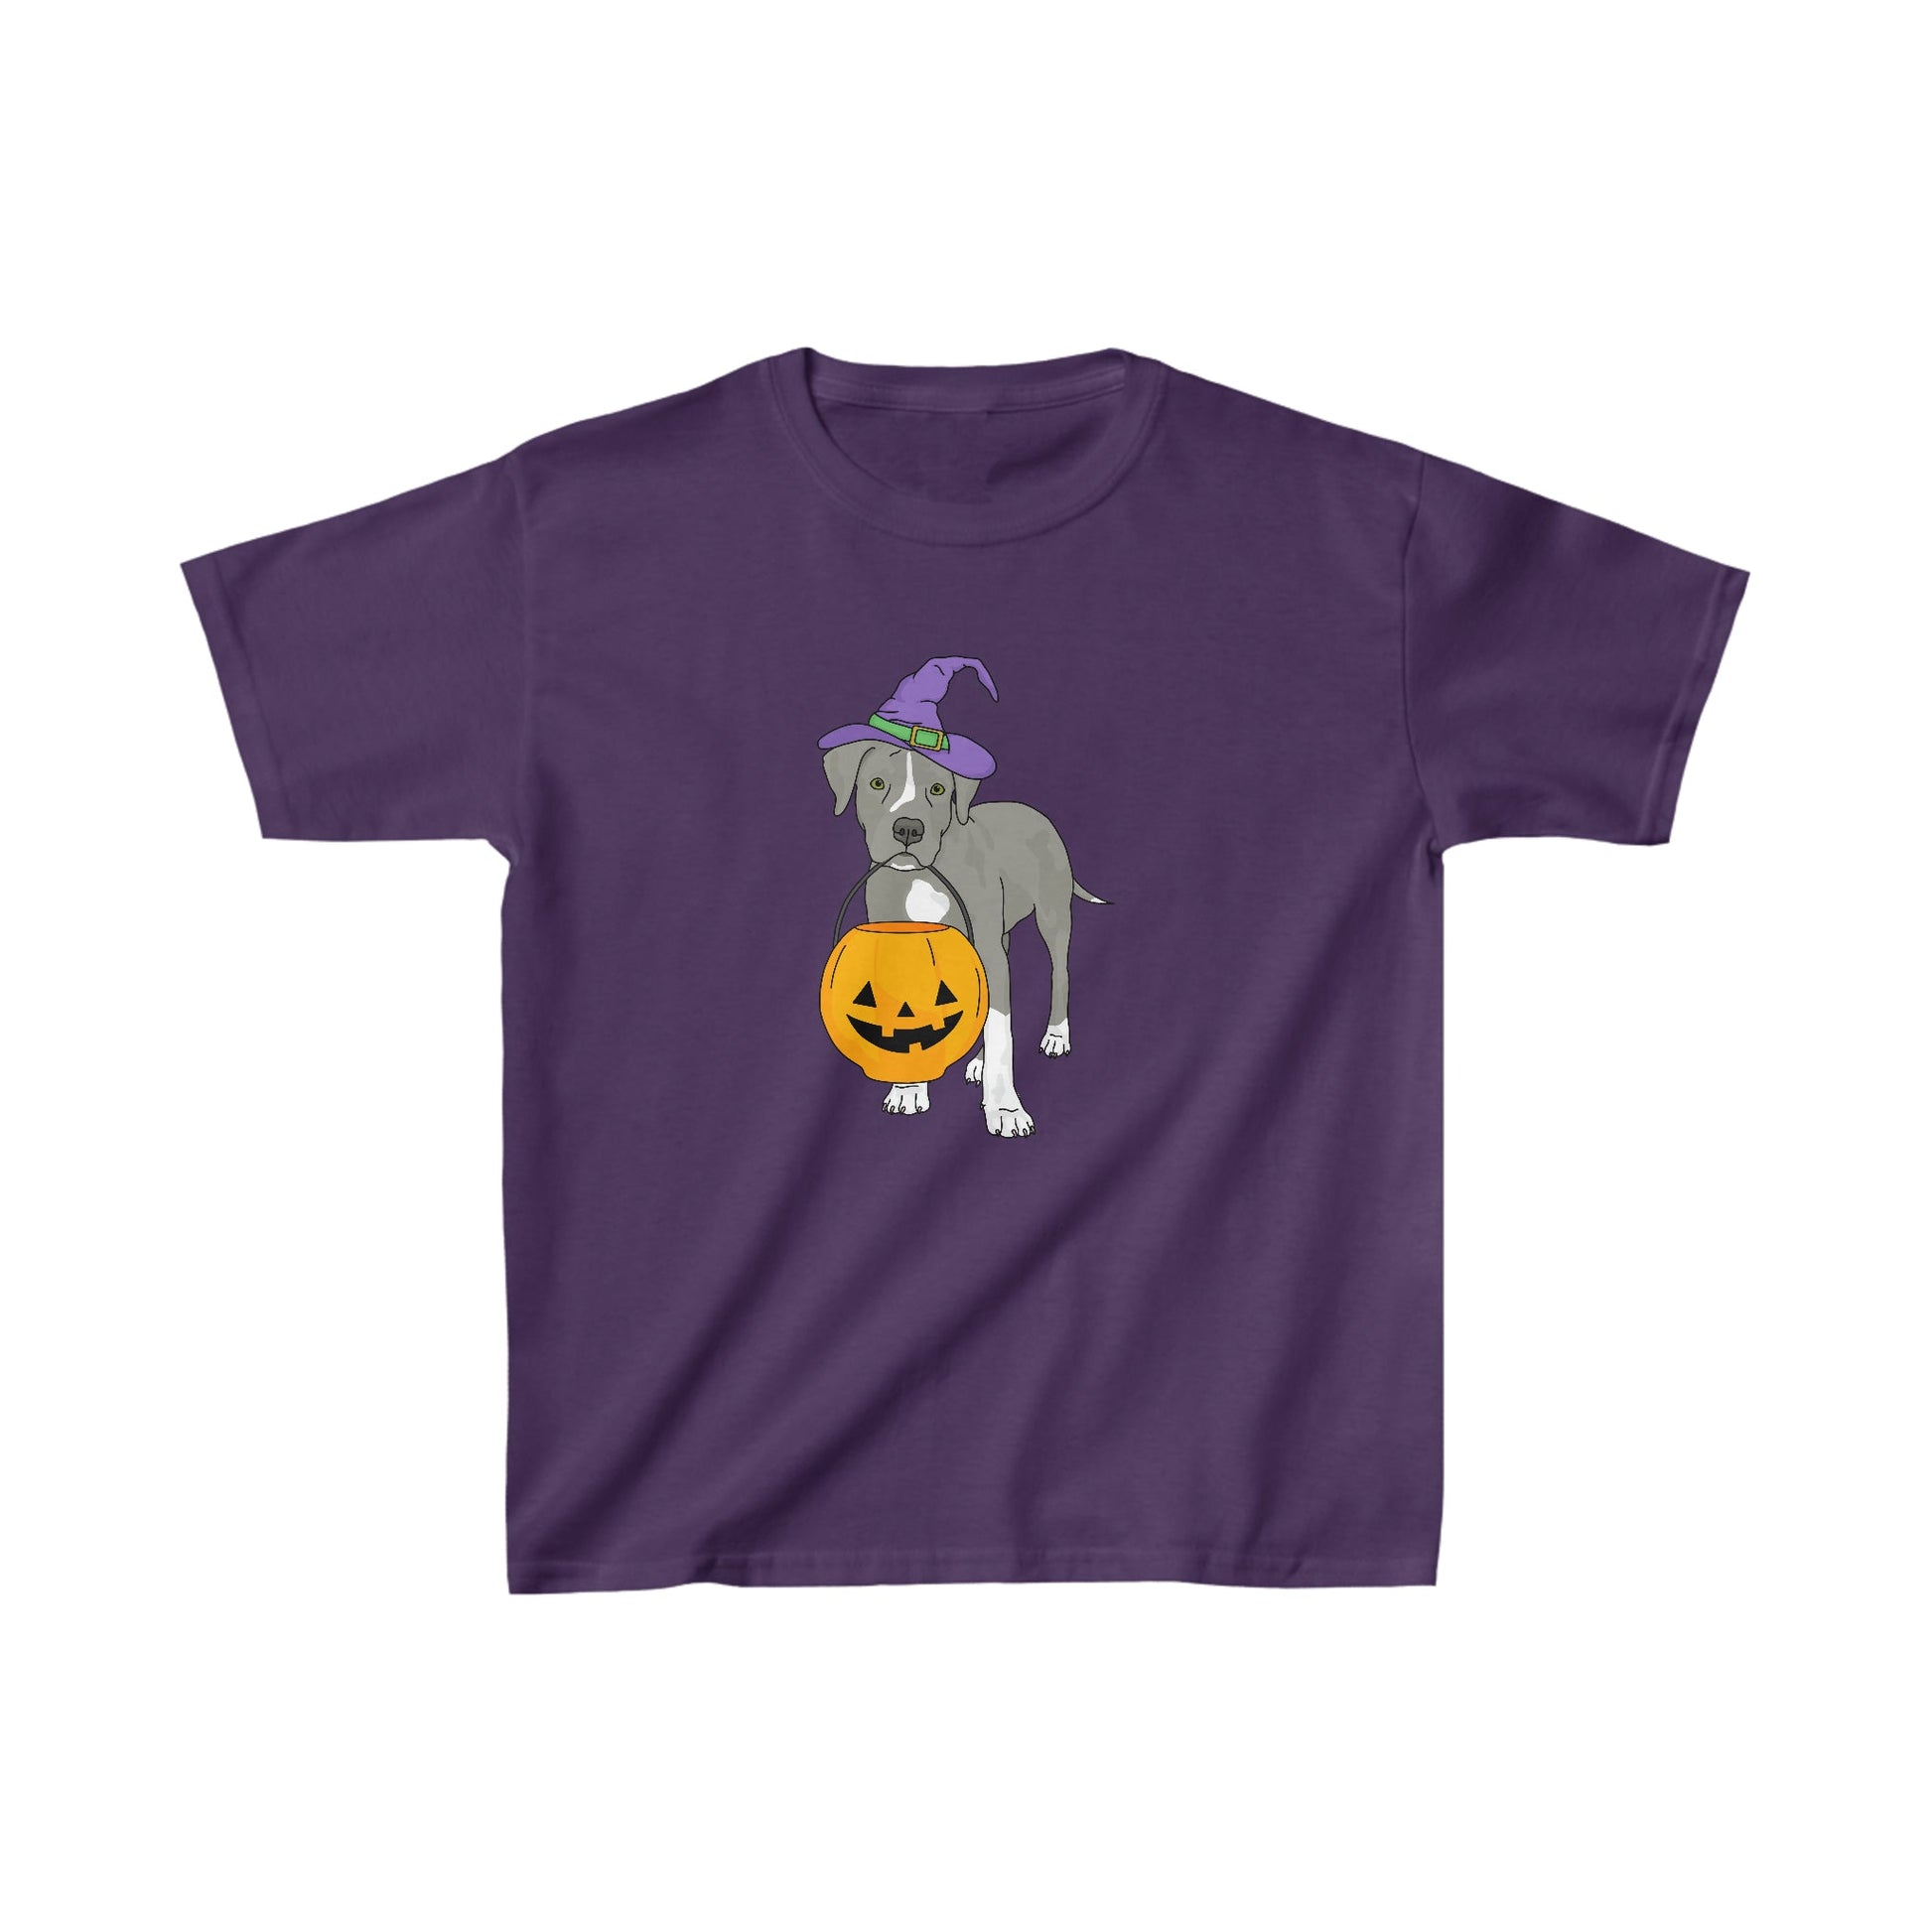 Witchy Puppy | **YOUTH SIZE** Tee - Detezi Designs-16665557522809801047